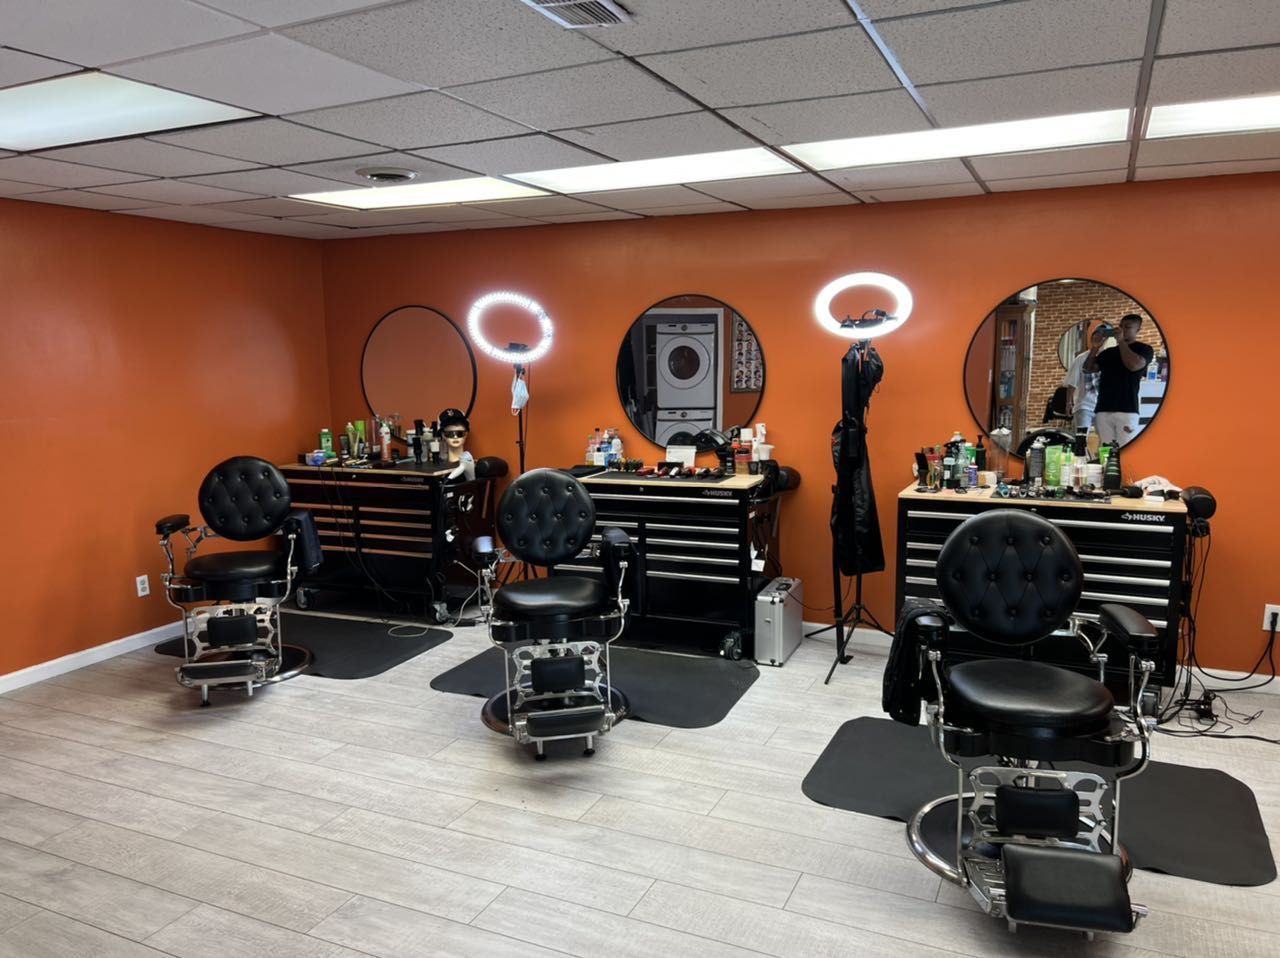 The 10 Best Barber Shops Near Me (with Prices & Reviews)